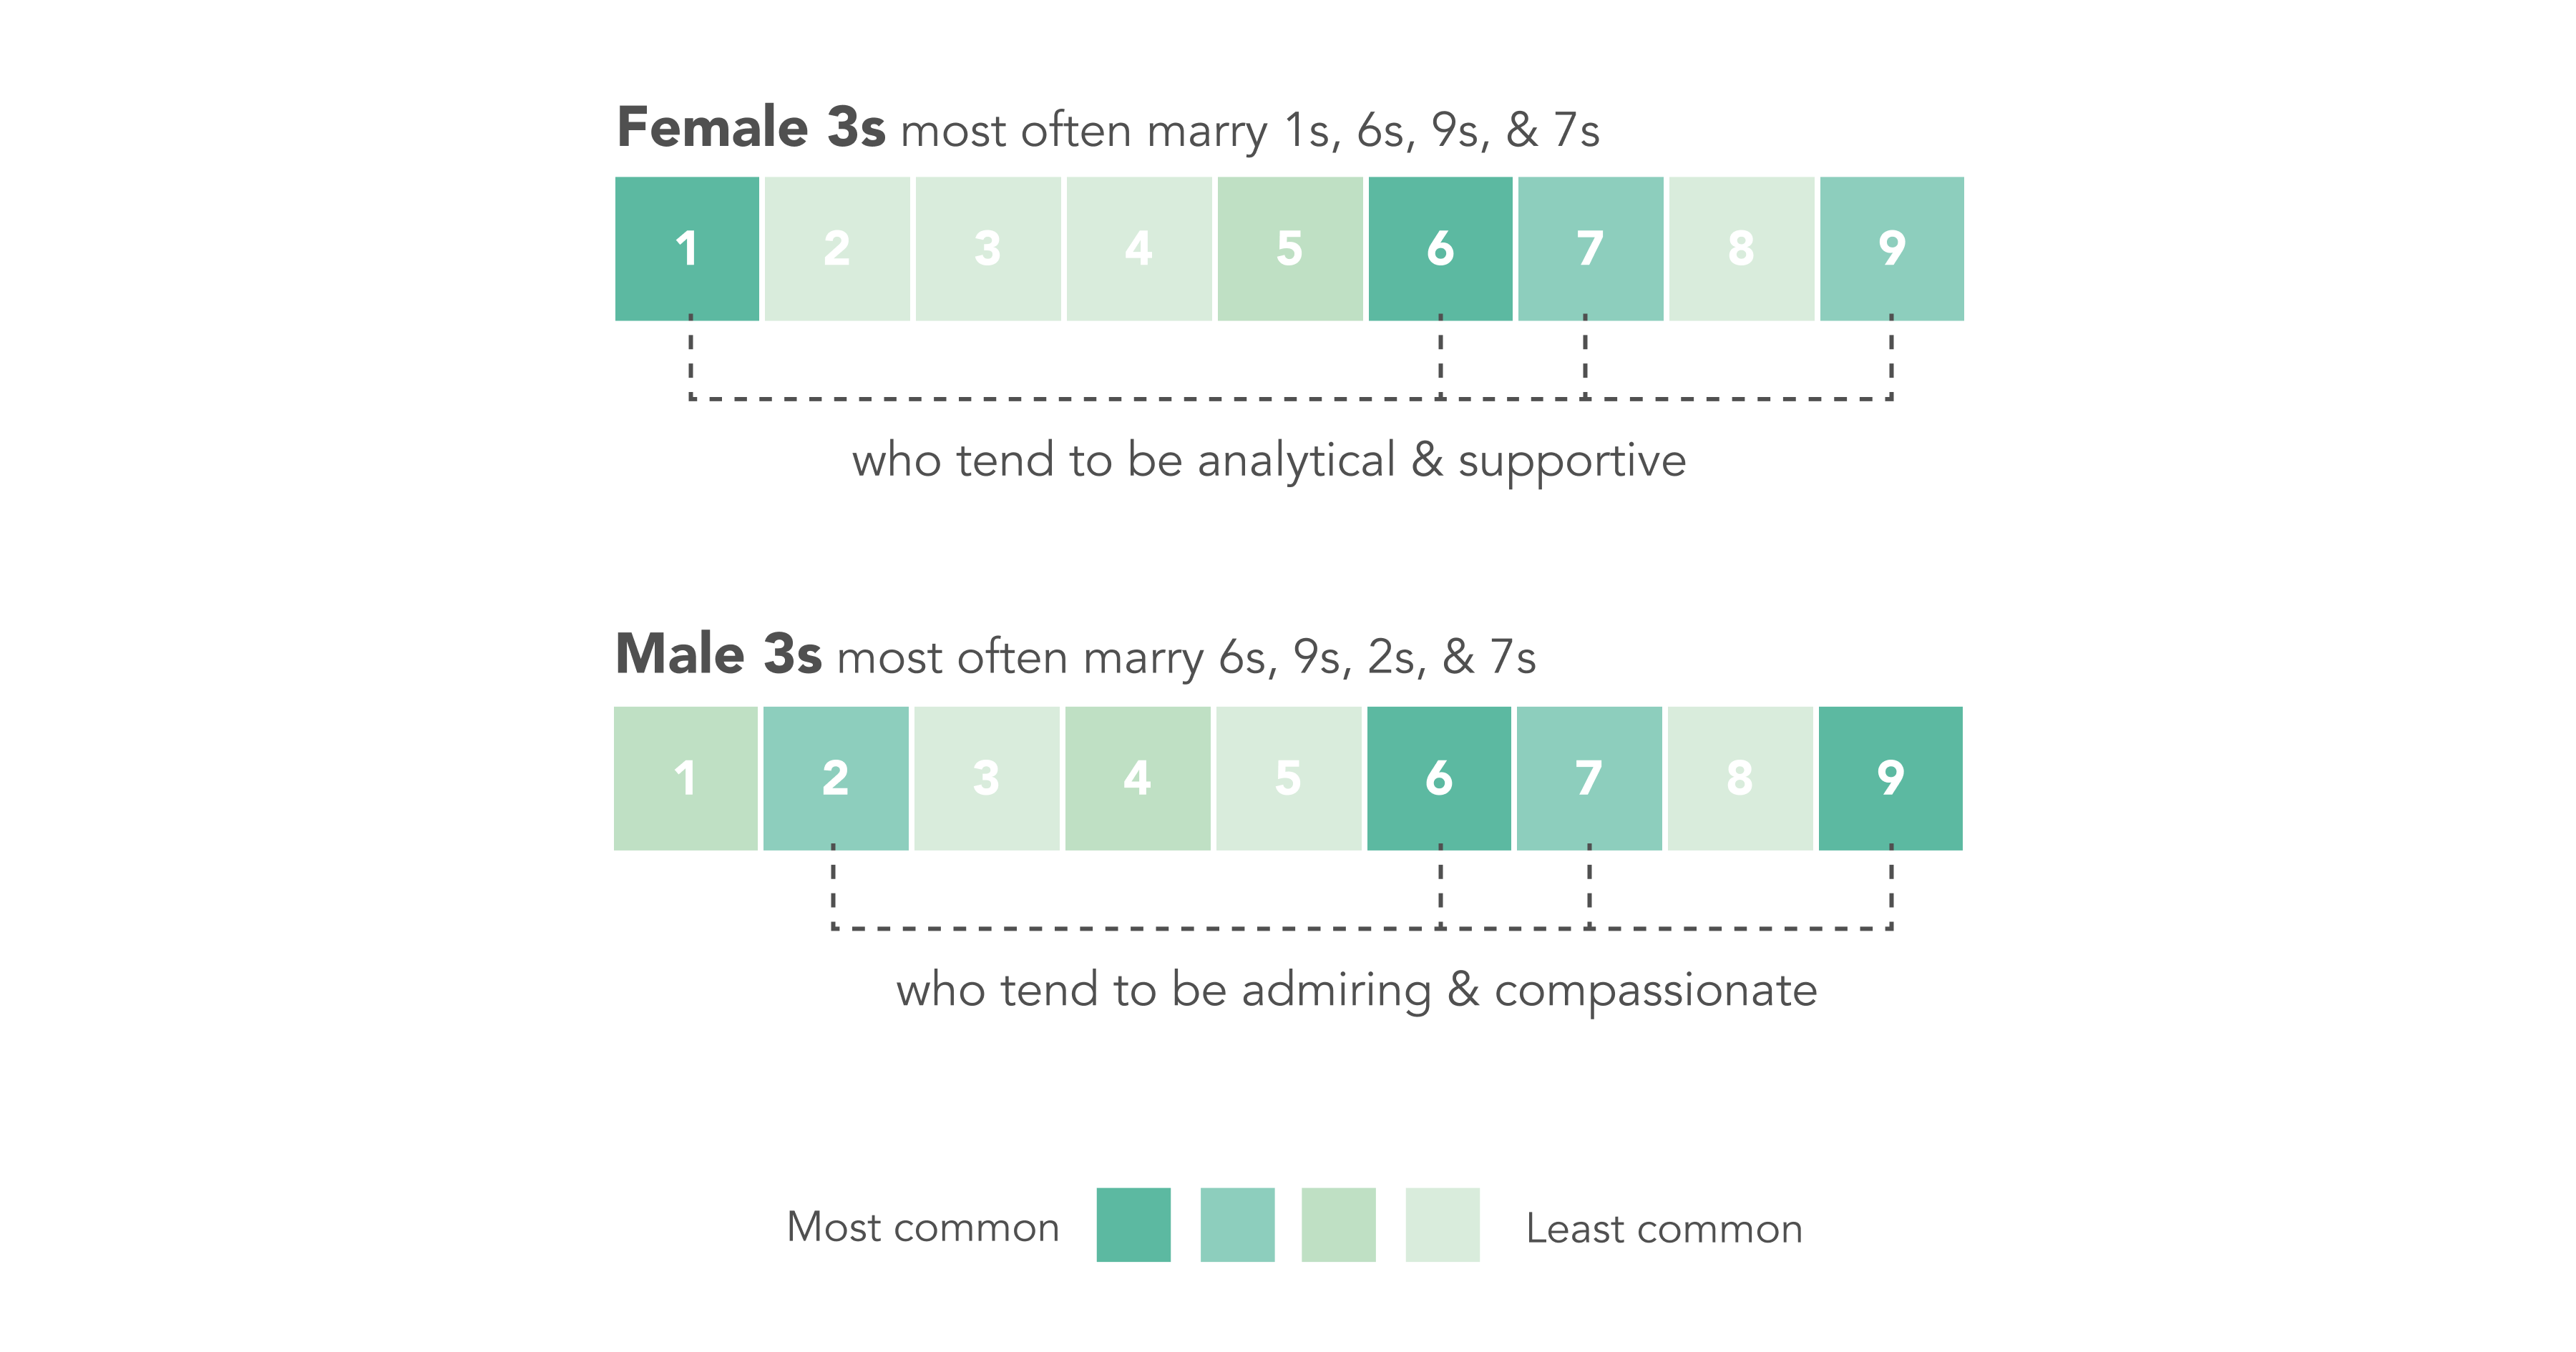 Female 3s most often marrying 1s, 6s, 9s, and 7s, and Male 5s most often marrying 6s, 9s, 2s, and 7s (in that order)